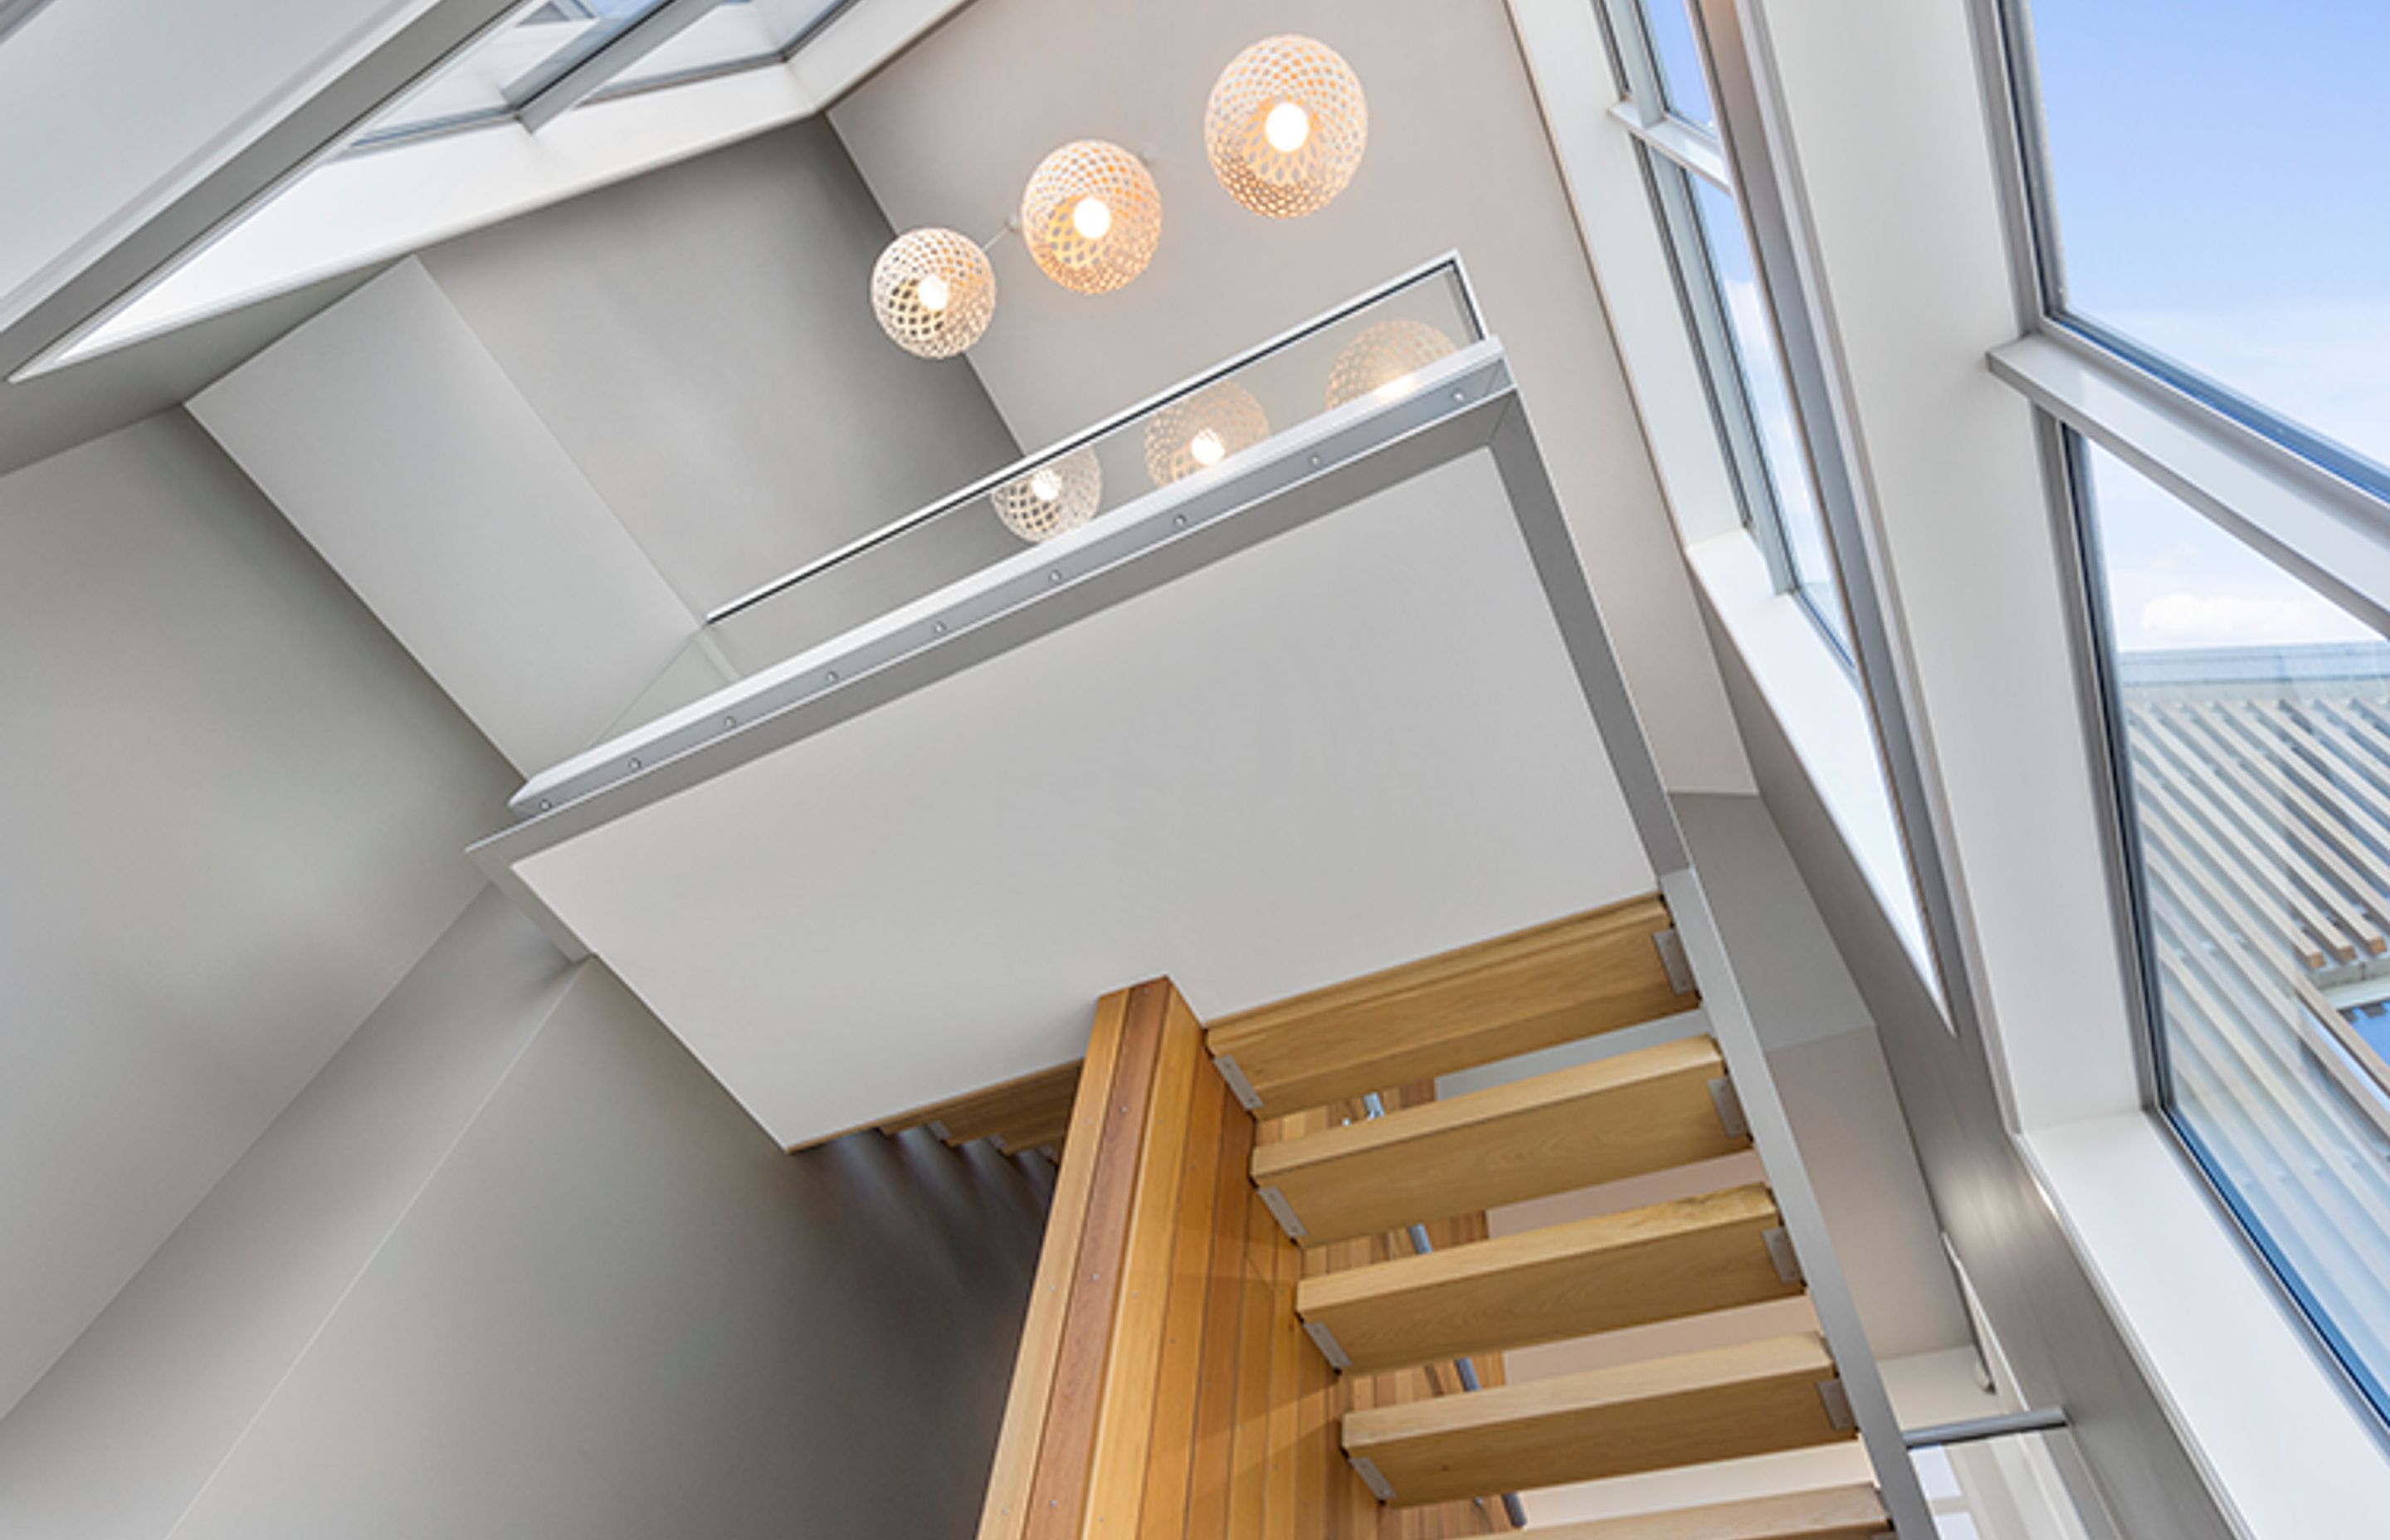 Cedar carries into the interior, featured in the suspended floating staircase with exposed steel and glass framing.